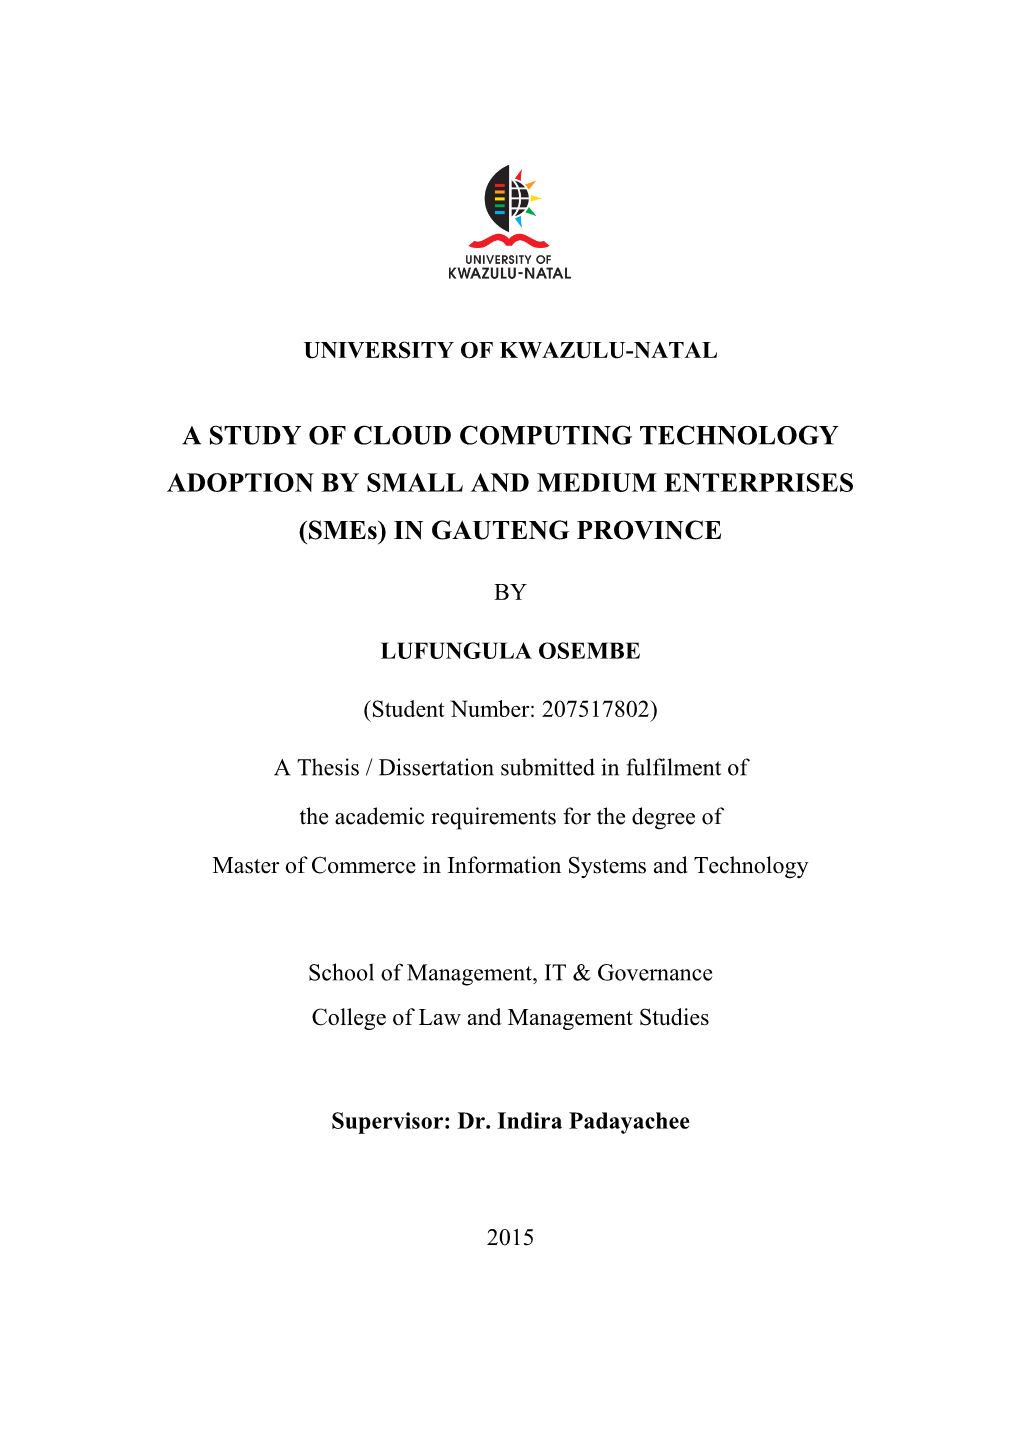 A STUDY of CLOUD COMPUTING TECHNOLOGY ADOPTION by SMALL and MEDIUM ENTERPRISES (Smes) in GAUTENG PROVINCE